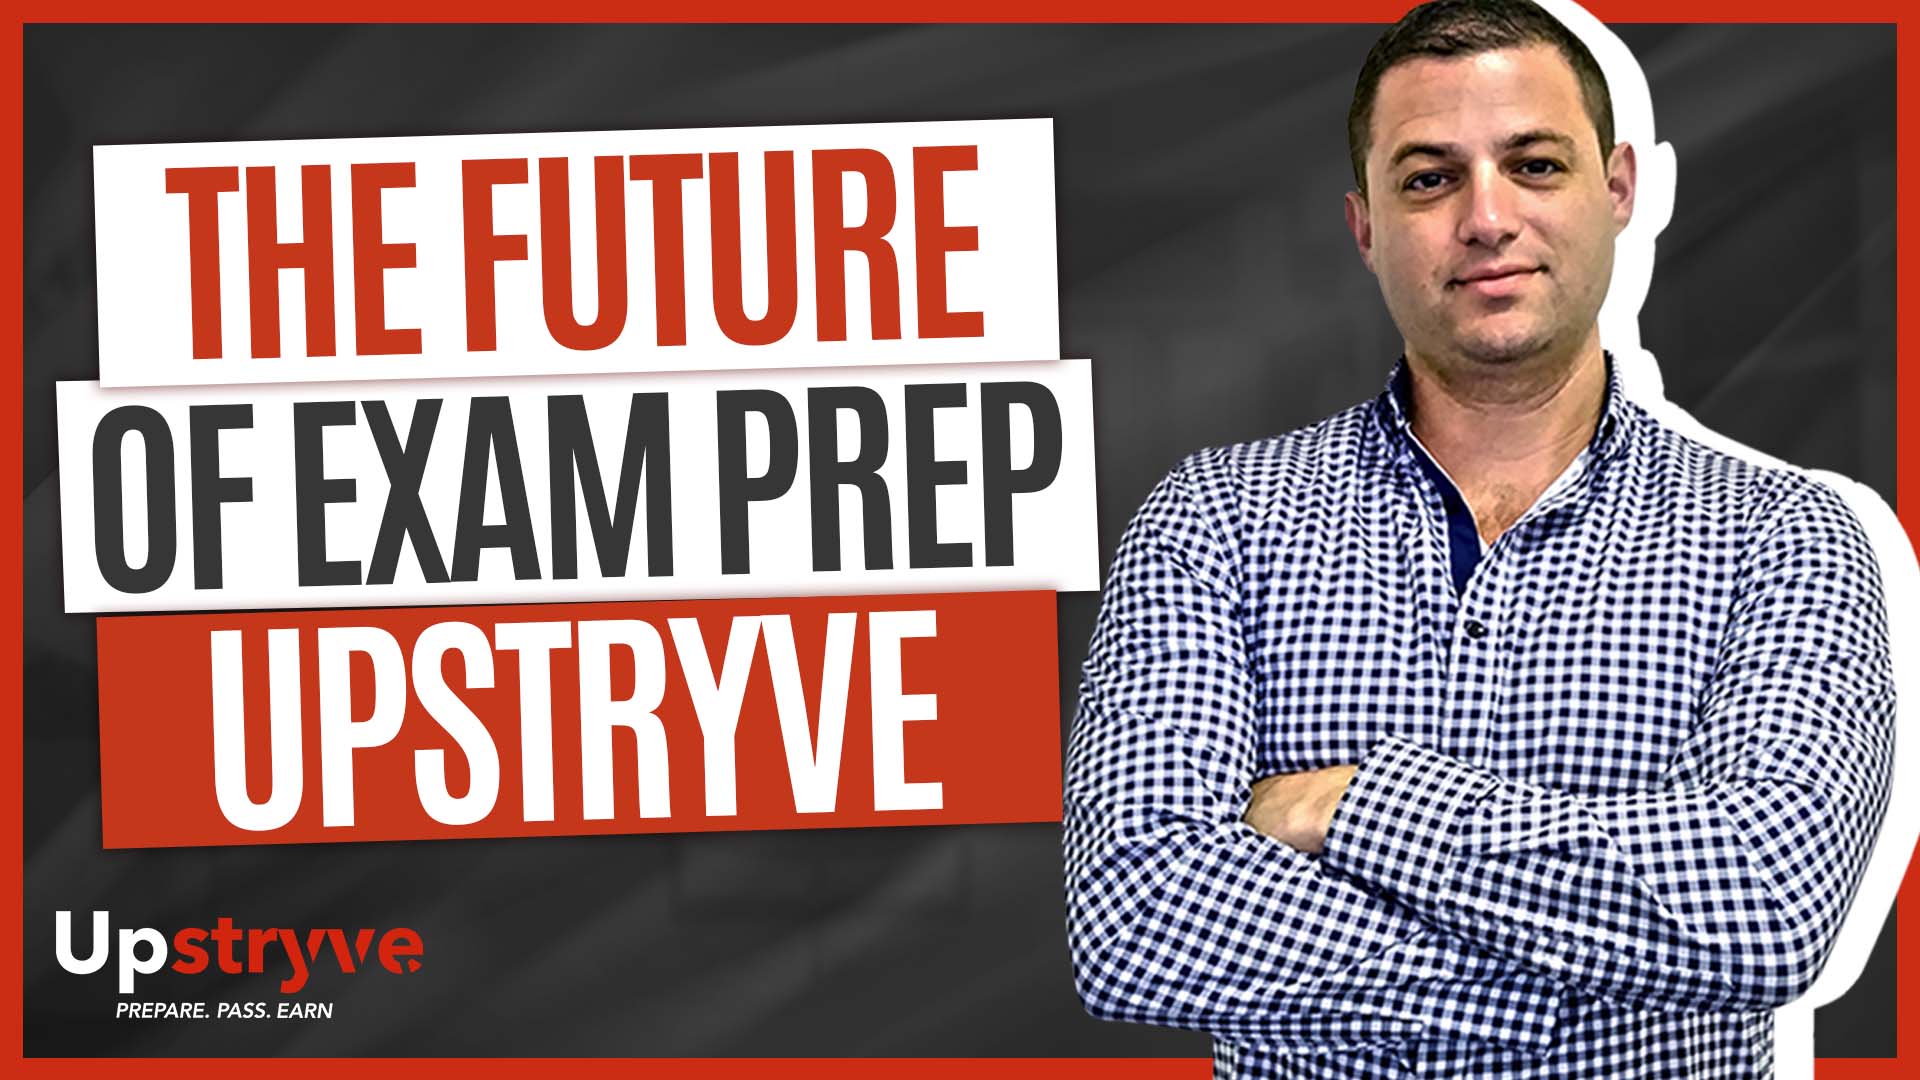 What is the best way to study for your contractor exam? Well, this is a question we get a lot here at Upstryve. The answer we always tell students is absolutely 1-on-1 tutoring provided by industry experts. Seems like an obvious answer right? Today we will be chatting with Founder and CEO of Upstryve Noah Davis. He will give us some insight on the difficulties he faced when searching for this kind of 1-on-1 experience and how it led him to create the number one tutoring platform and resource for trade professionals preparing for their trade exam.